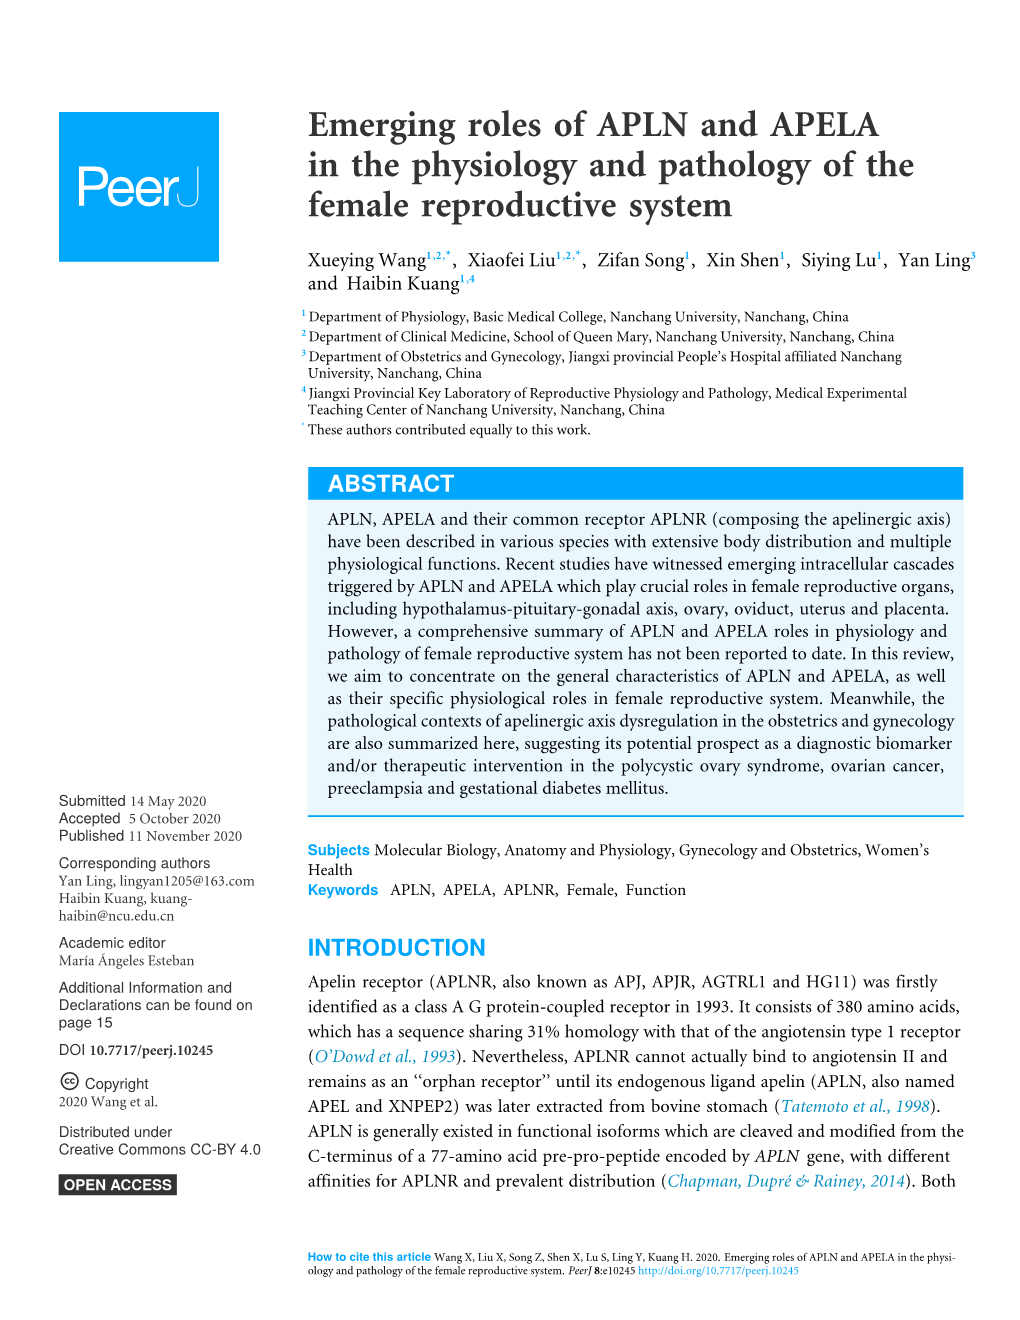 Emerging Roles of APLN and APELA in the Physiology and Pathology of the Female Reproductive System